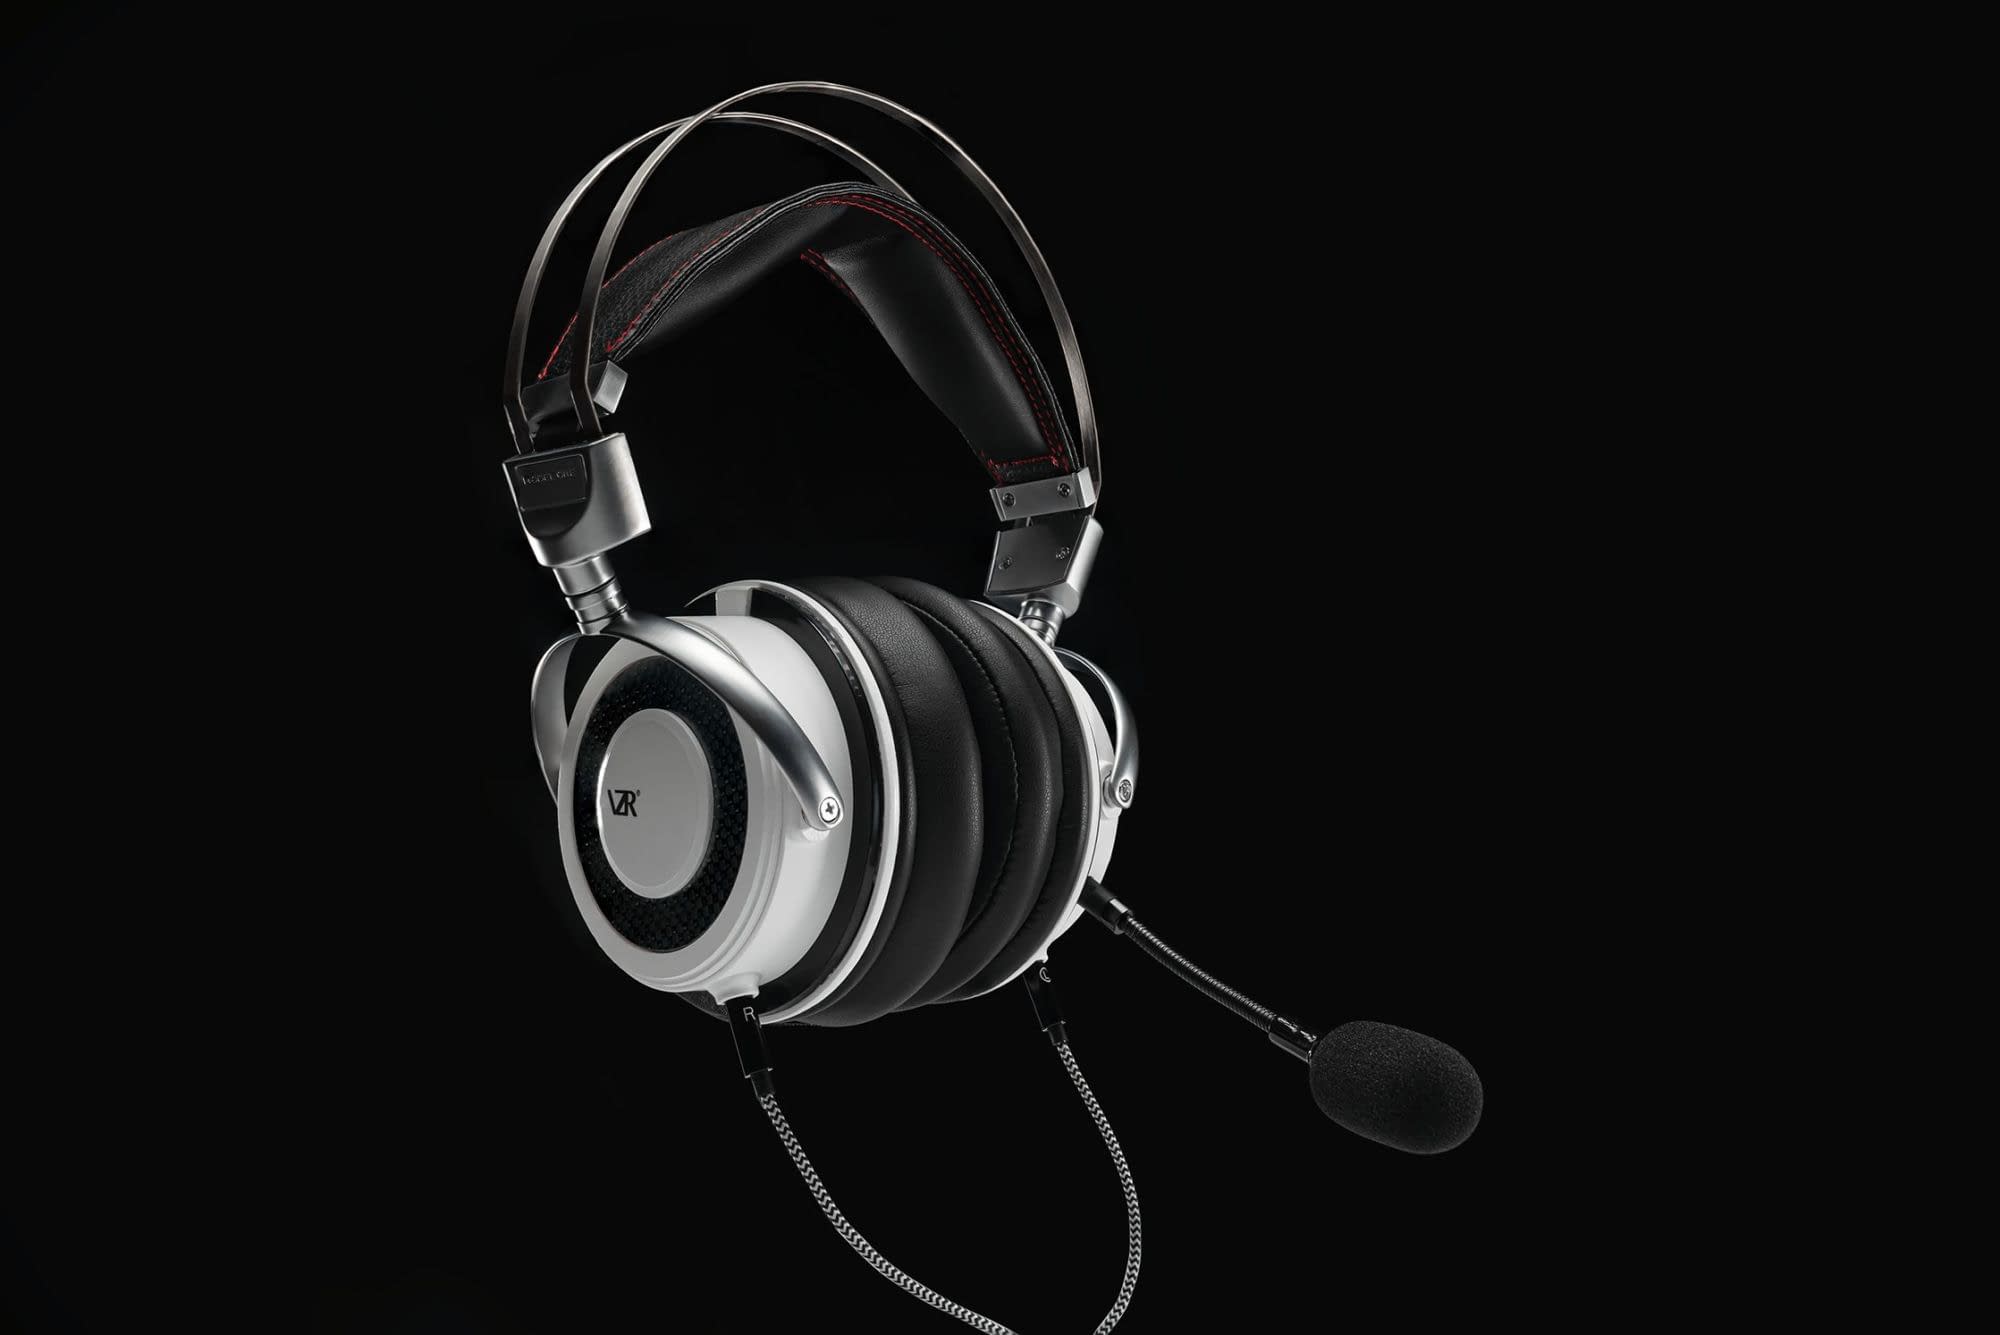 VZR Reveals Model One Gaming Headset Coming Q2 2021